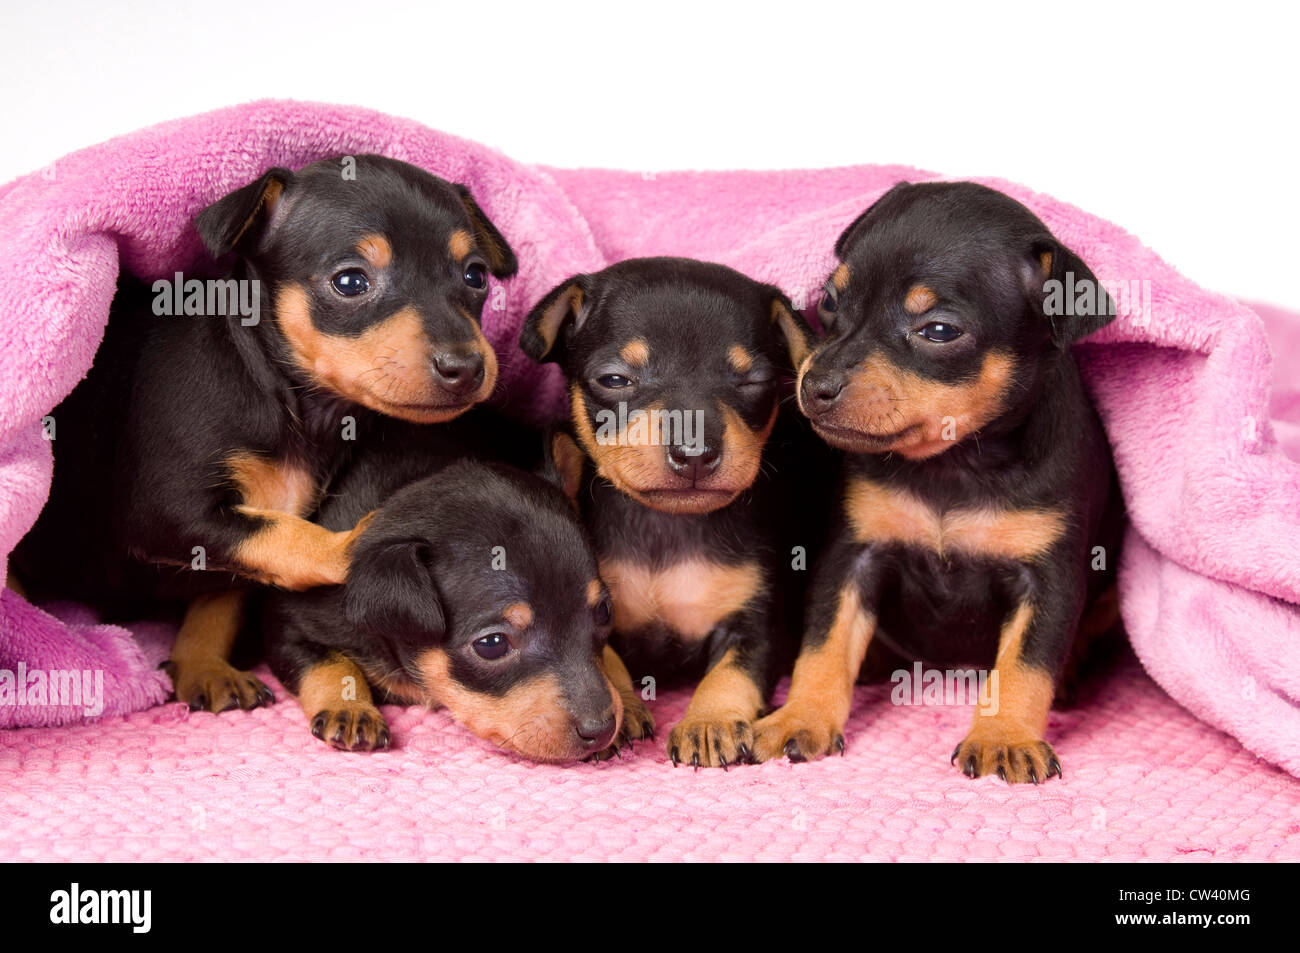 Prague Rattler. Four puppies in a pink blanket. Studio picture against a white background Stock Photo